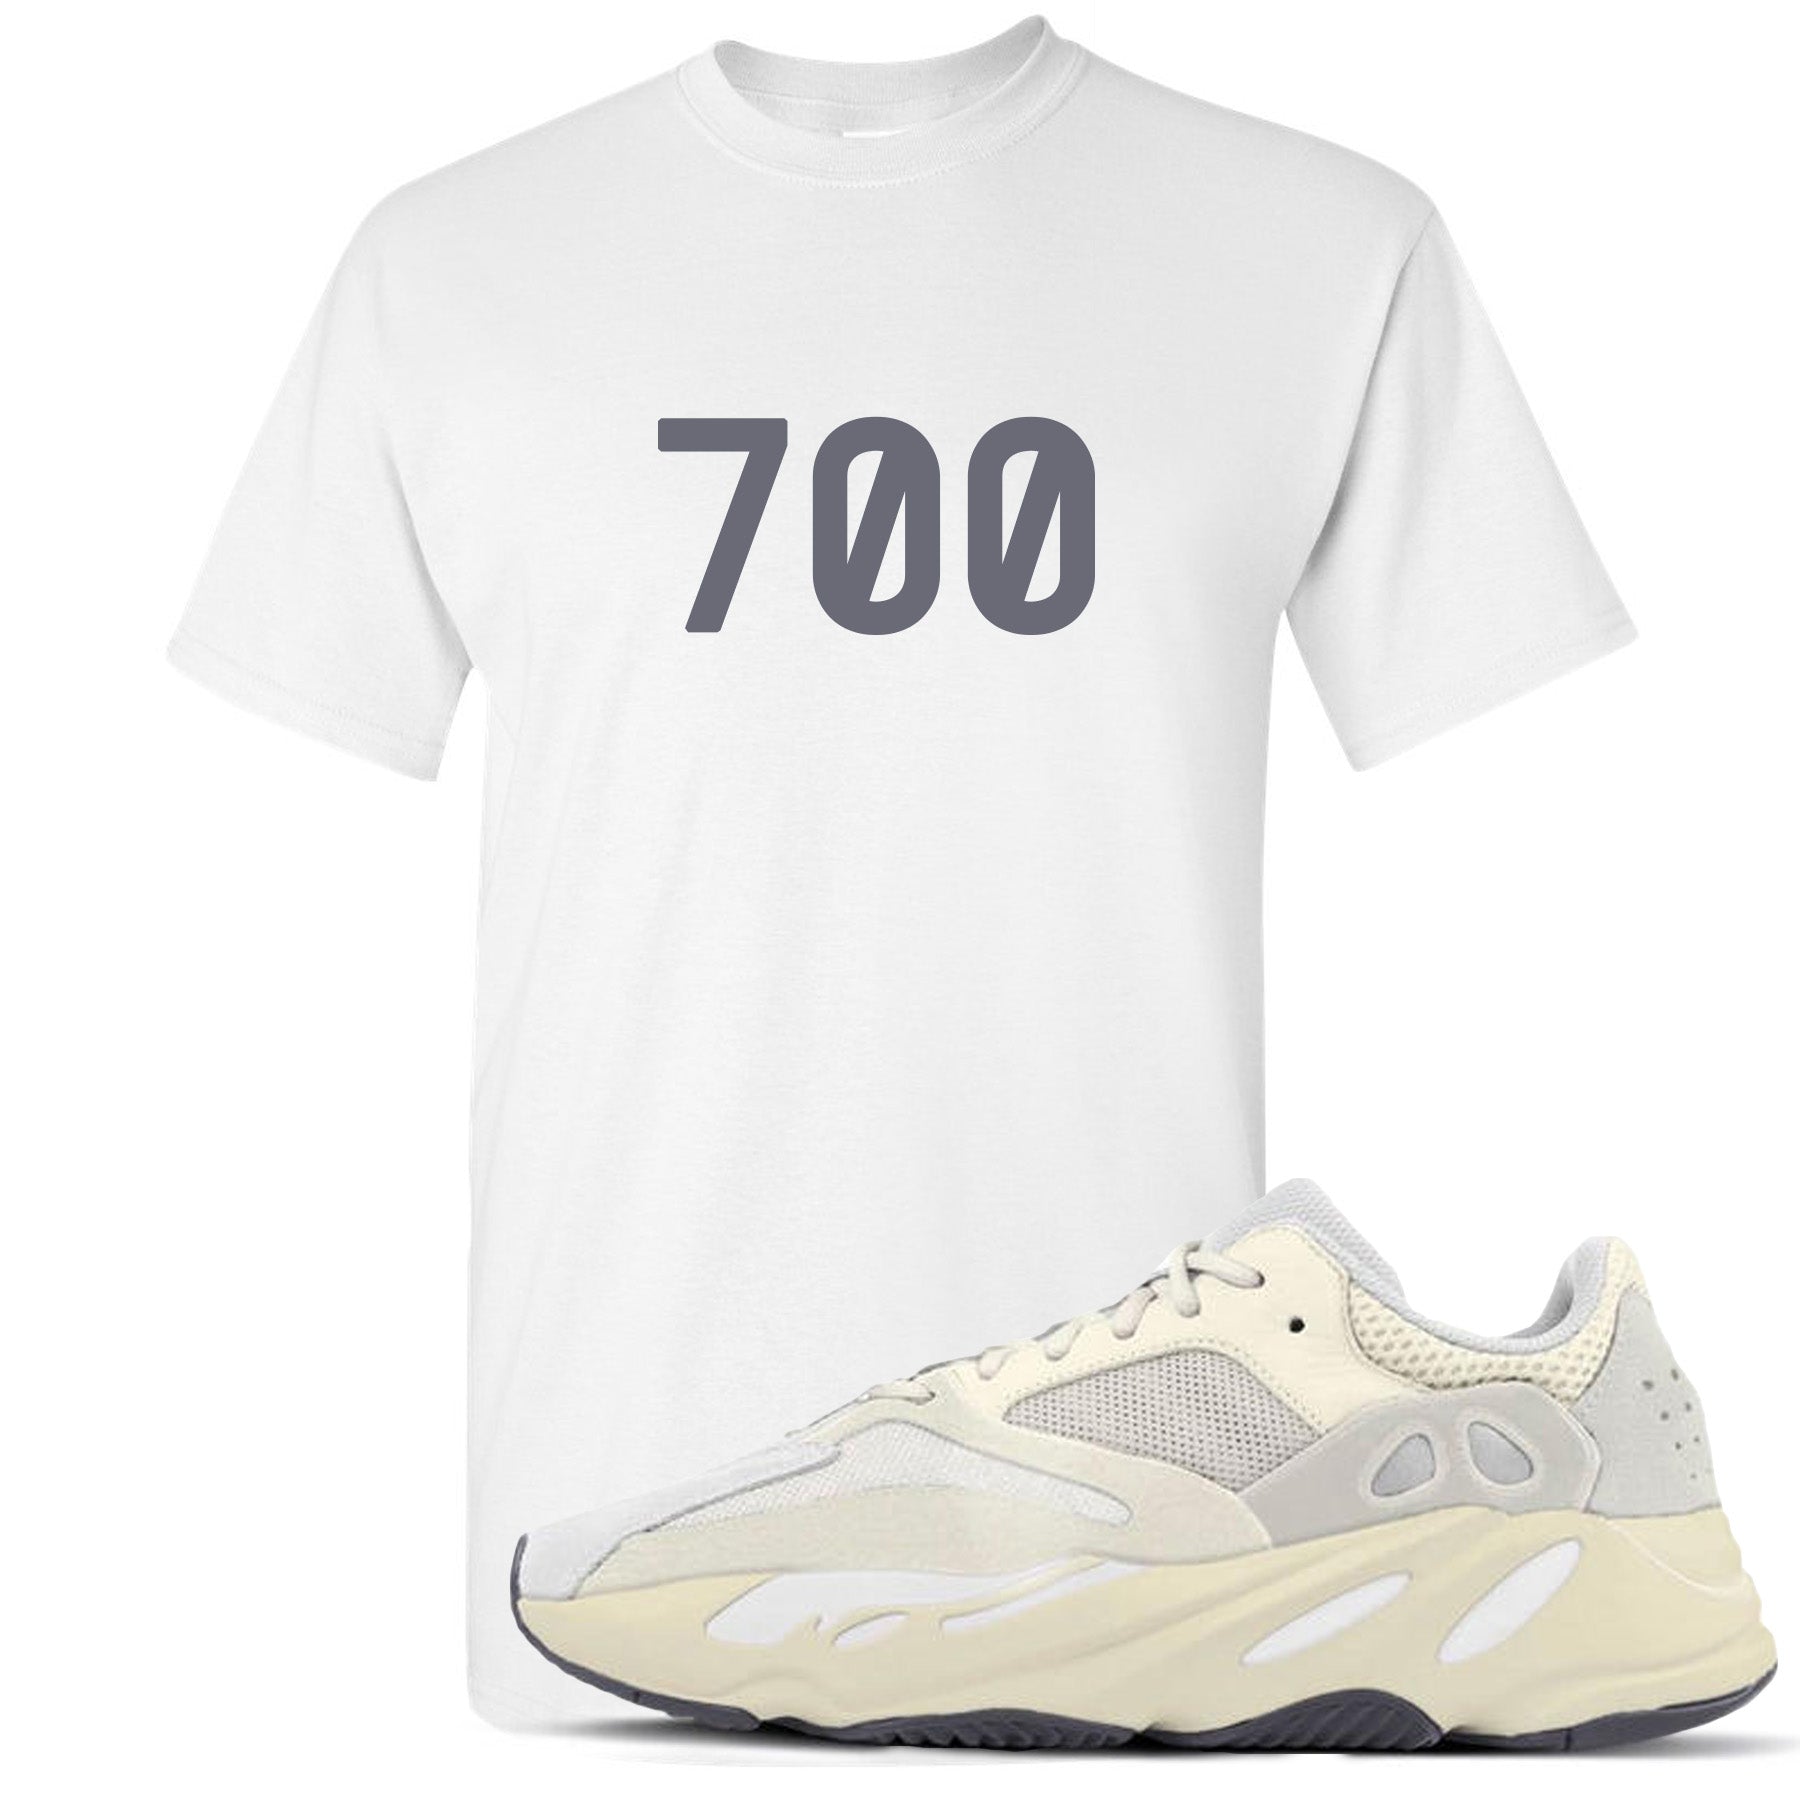 shirt to go with yeezy 700